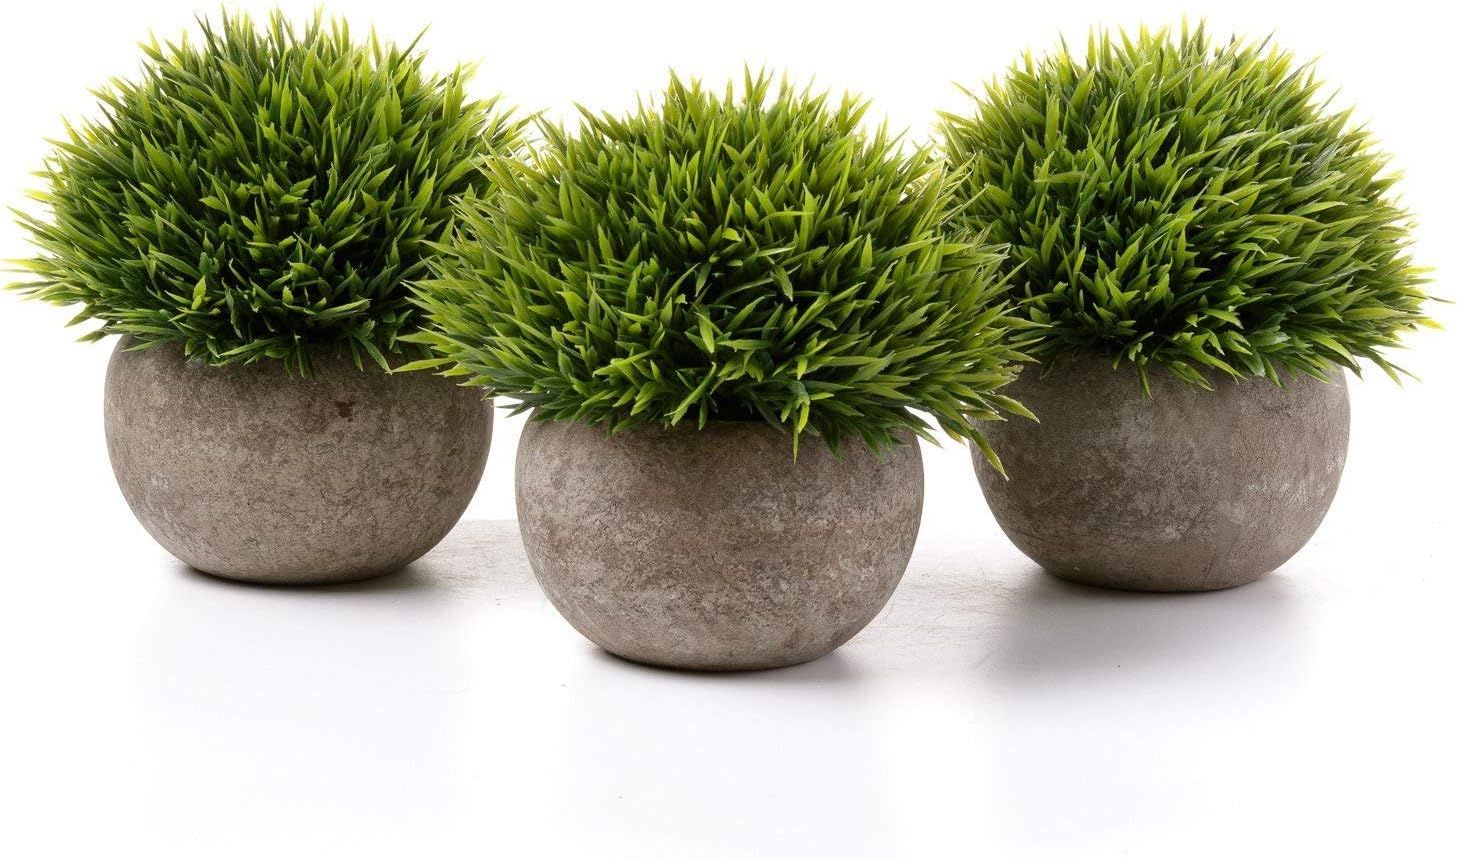 T4U 5 Inch Fake Artificial Potted Grass Plants, Pack of 3 Faux Plants with Pulp Pots, Plastic Flo... | Amazon (CA)